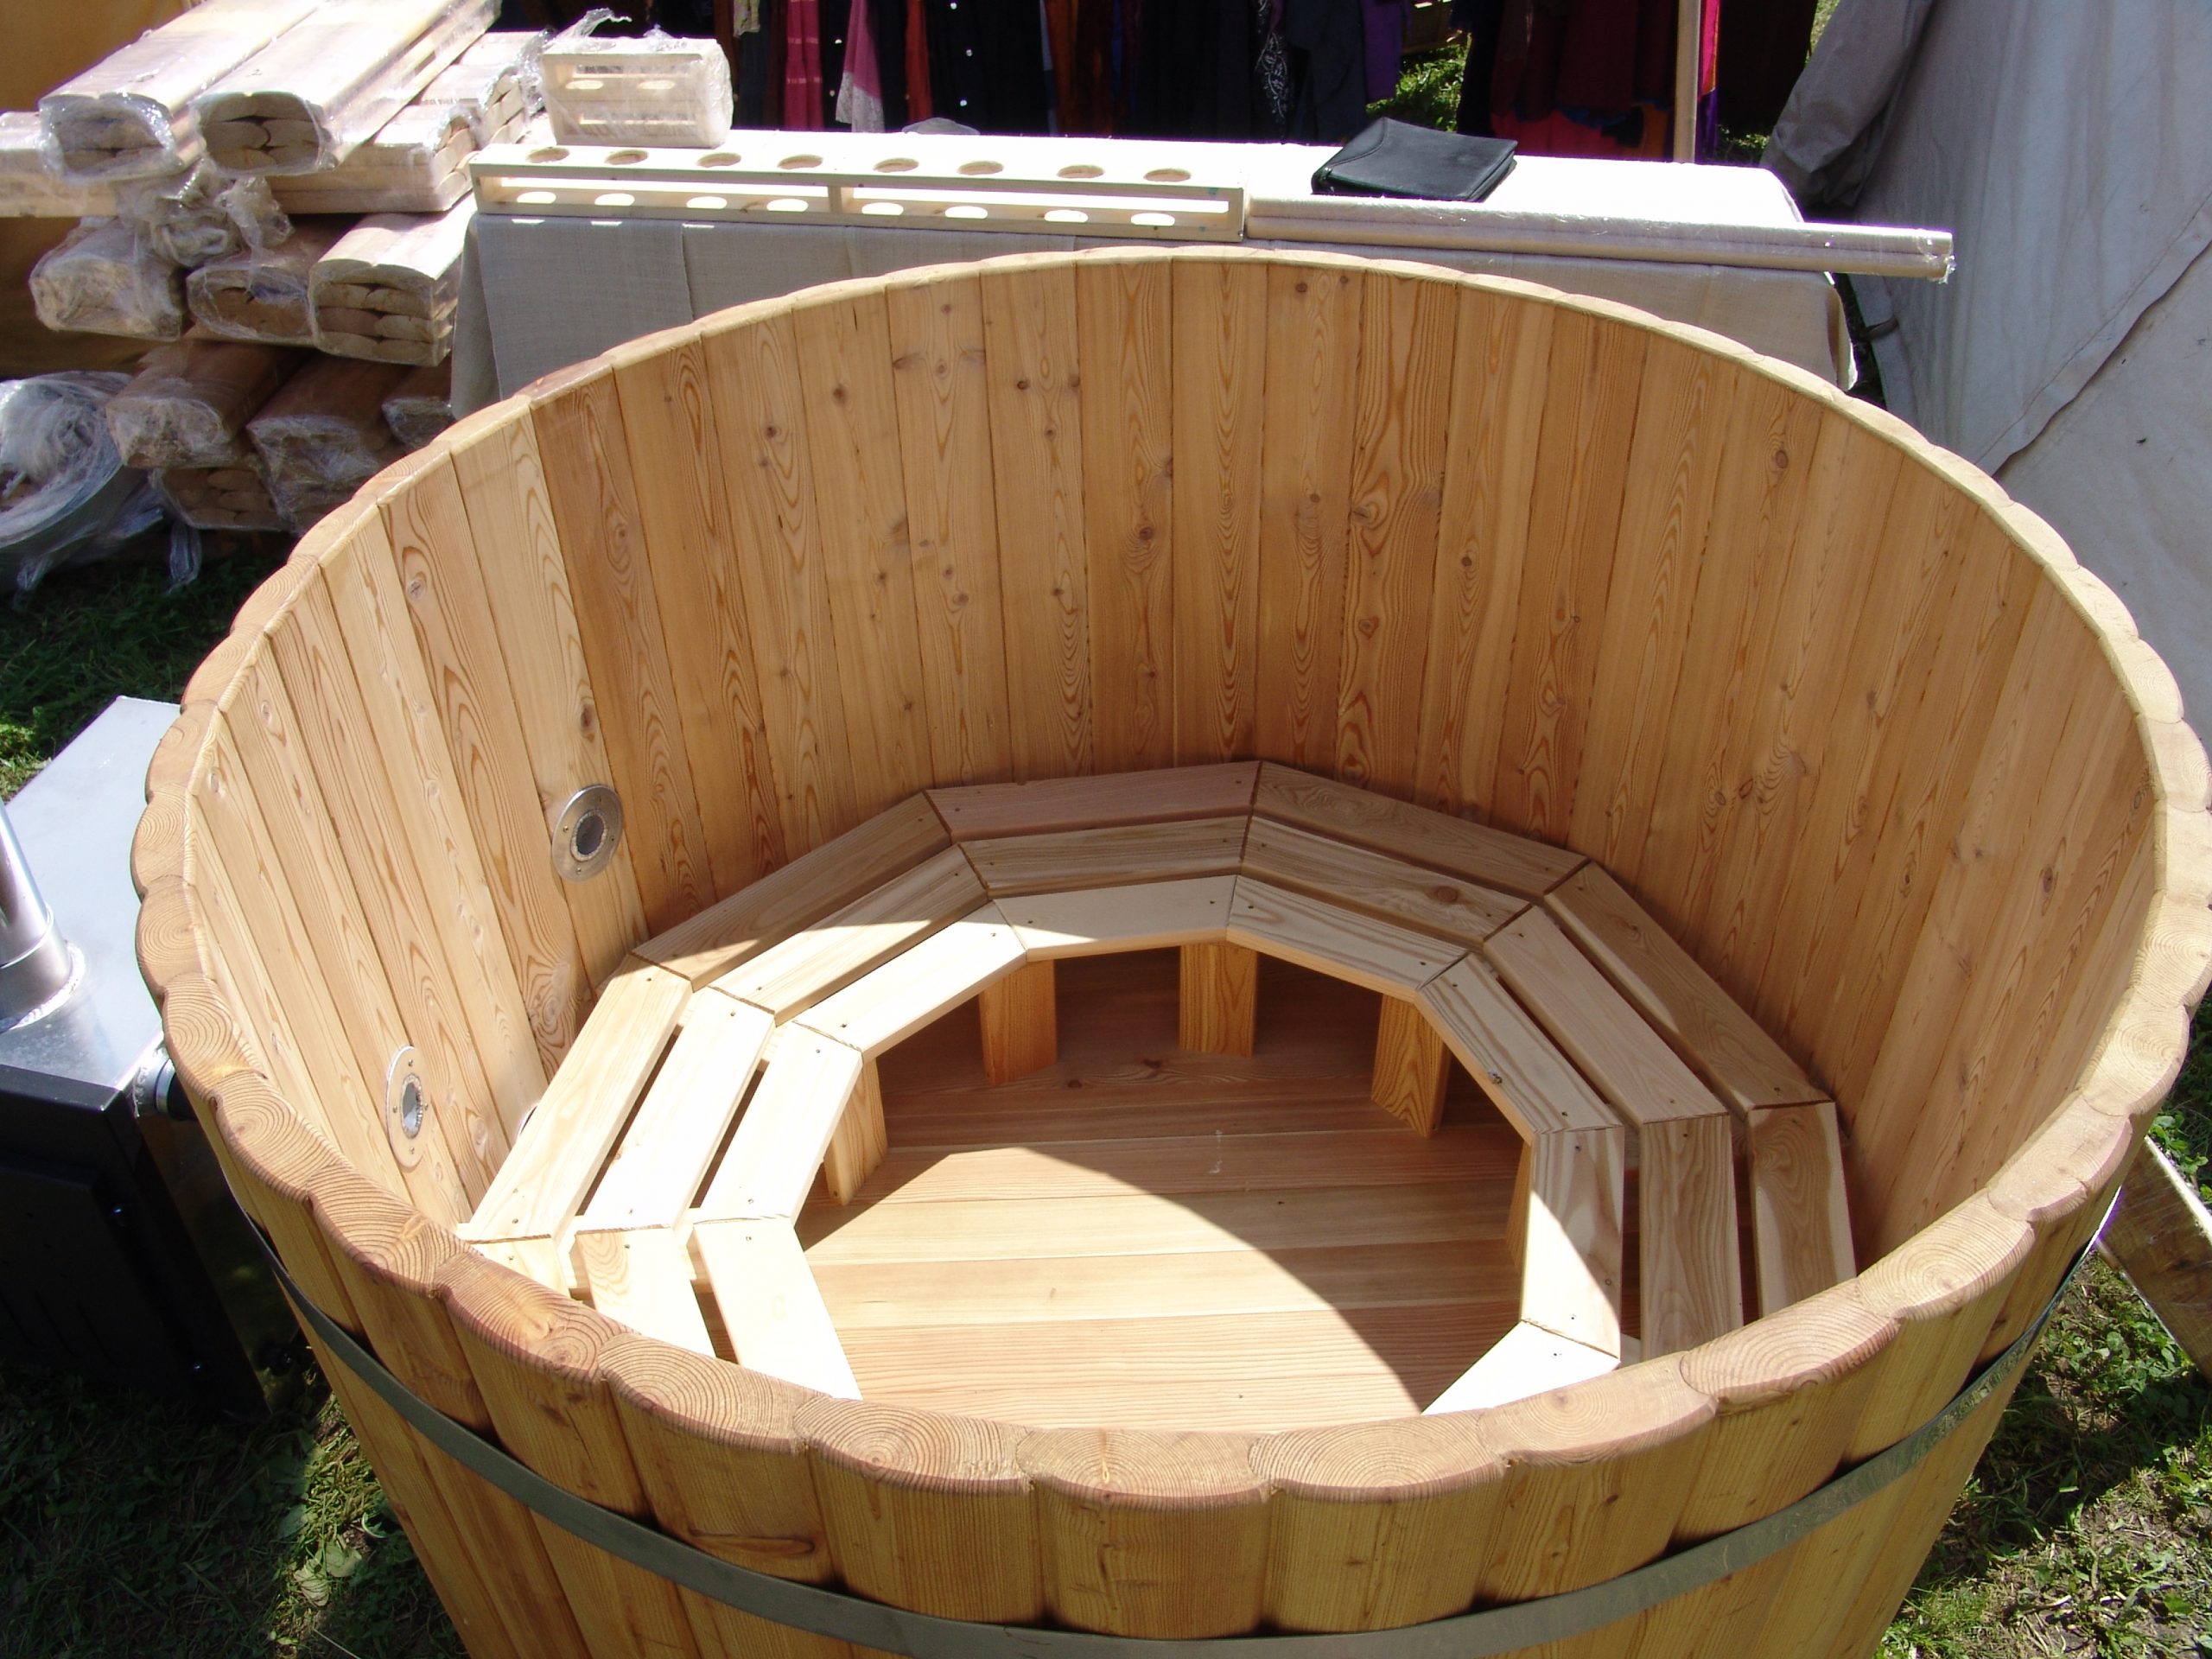 Get The Instructions And Details On Using A Wooden Hot Tub